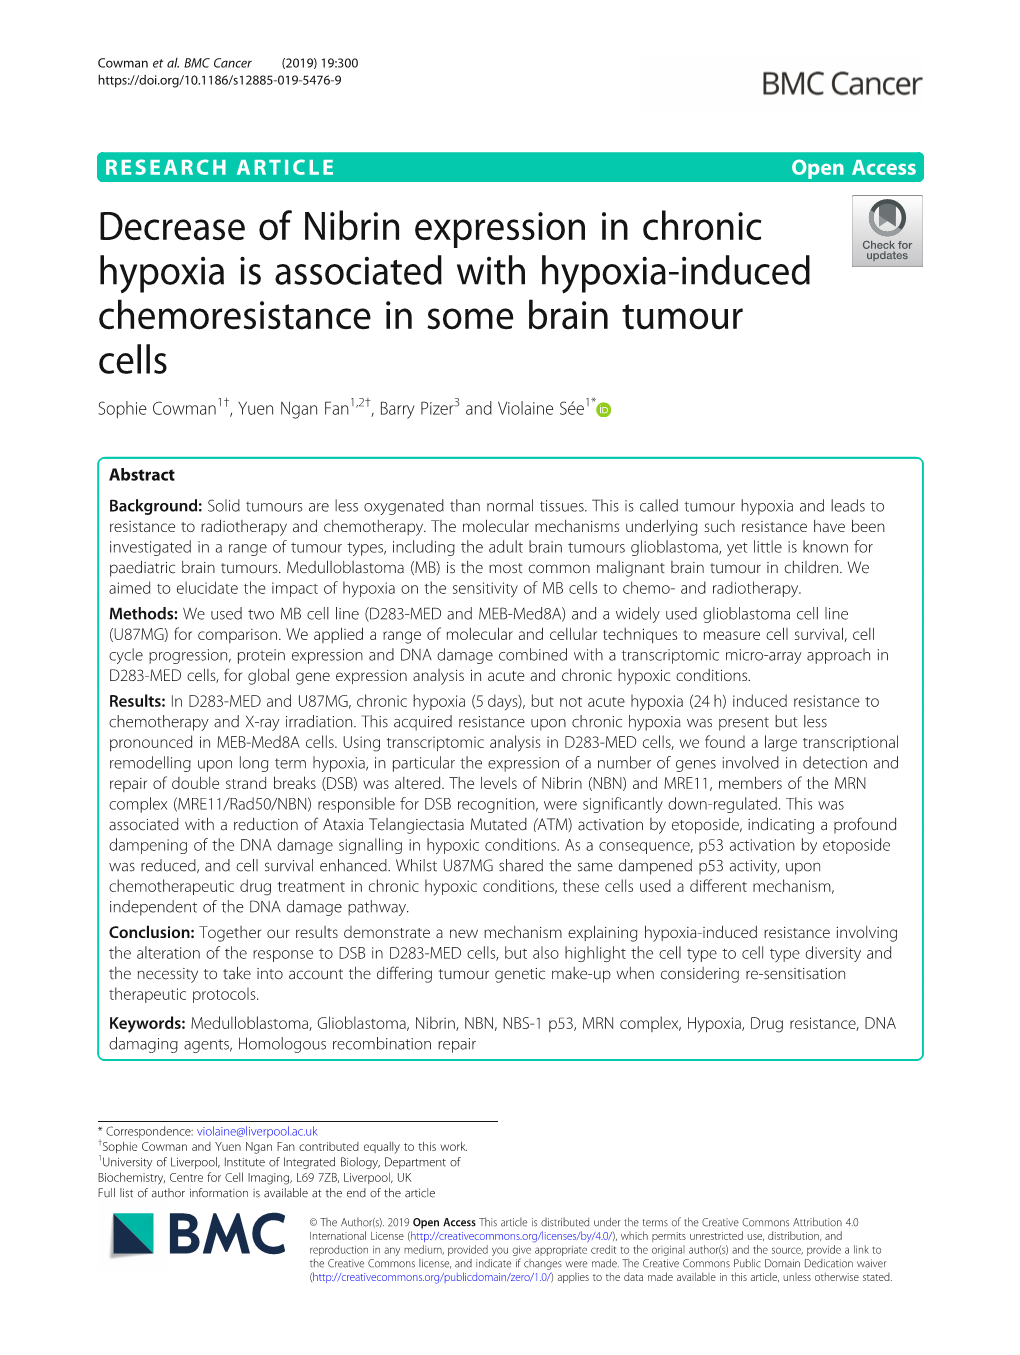 Decrease of Nibrin Expression in Chronic Hypoxia Is Associated With